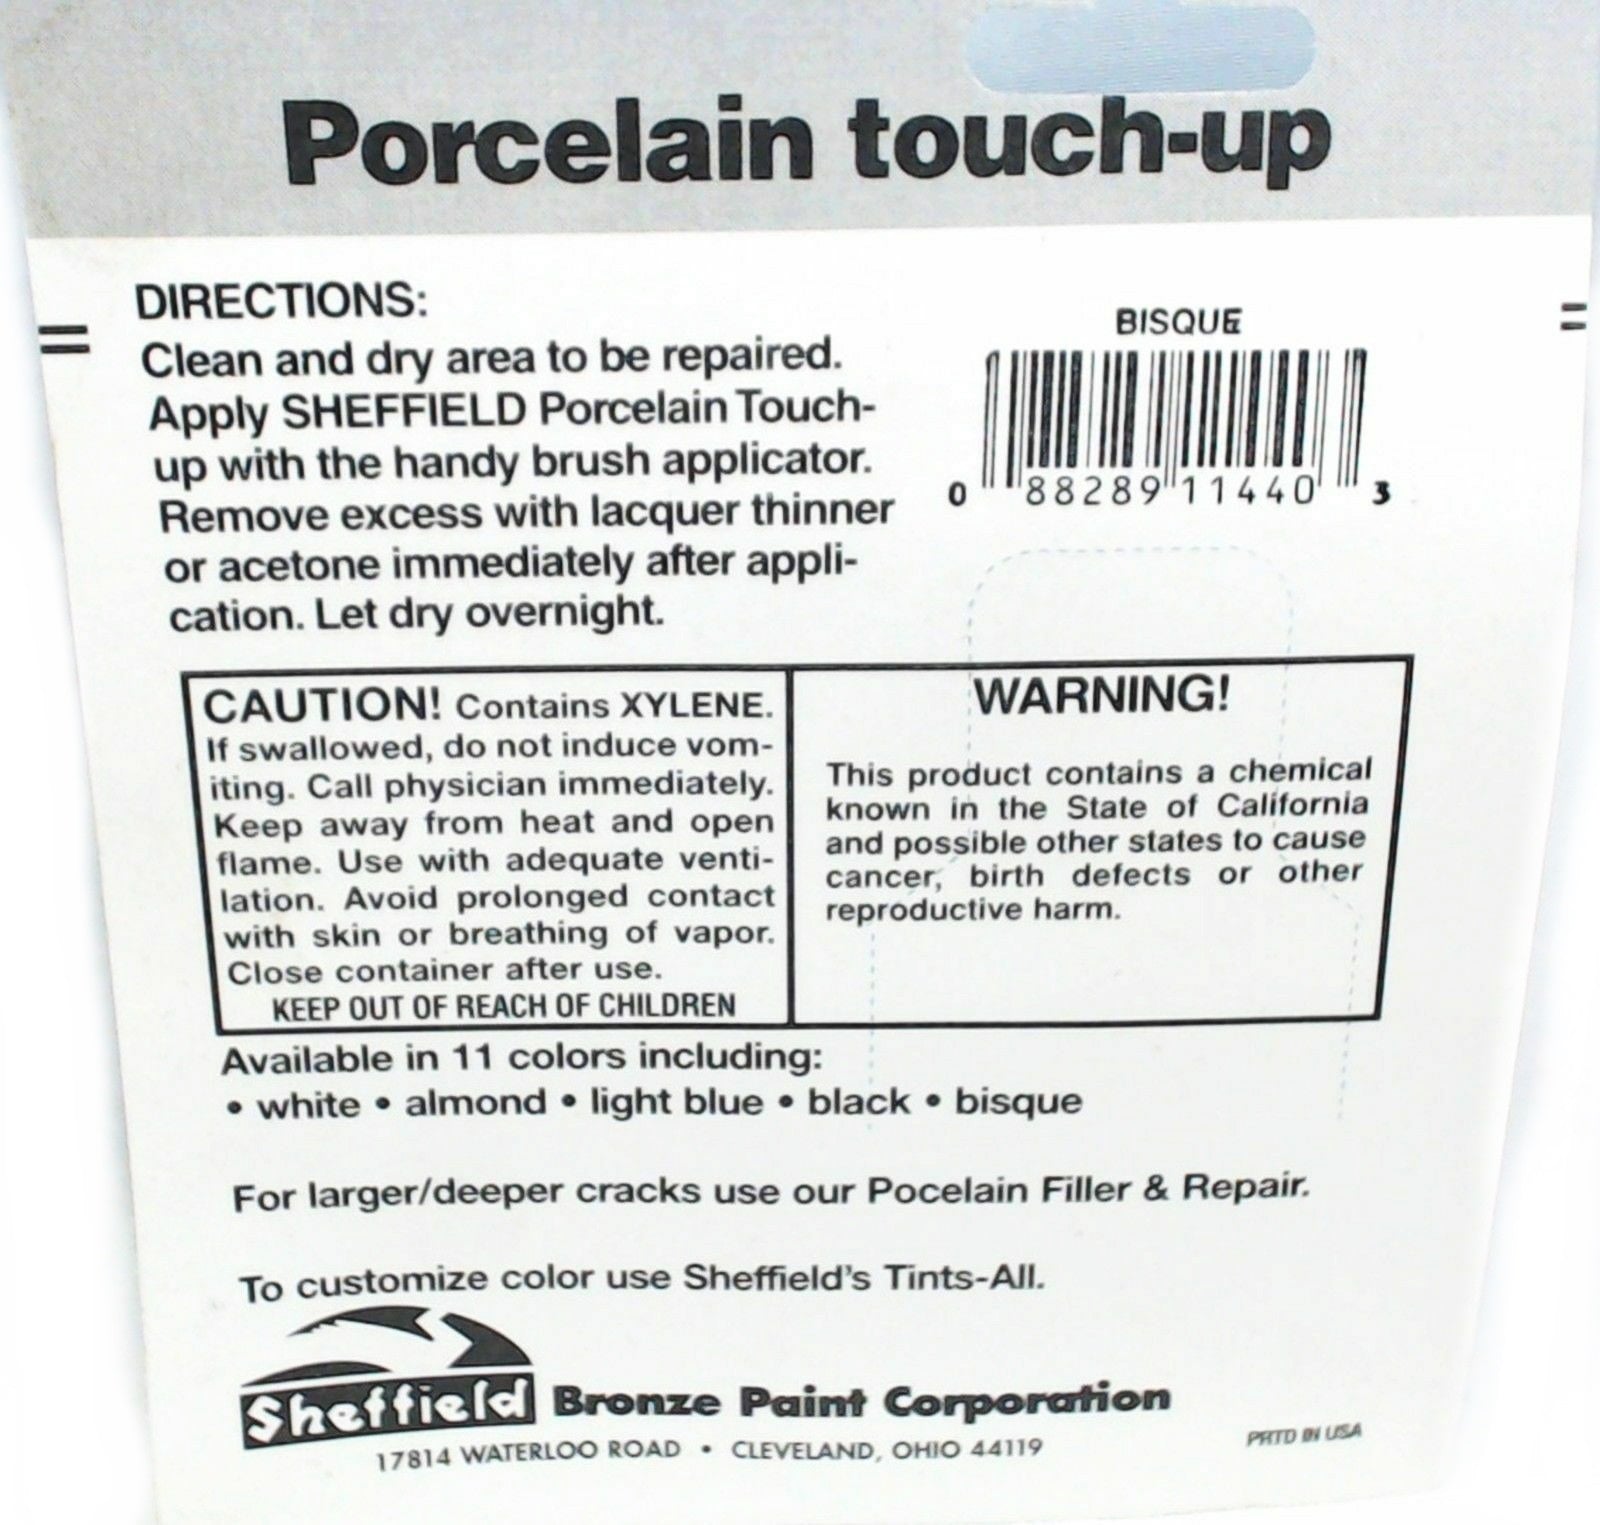  Appliance Bisque Porcelain Touch up Kit Repairs Porcelain and  Enamel: Chips, Cracks, and Scratches in appliances, fixtures, Stoves,  Fireplaces, Barbecue Grills : Industrial & Scientific